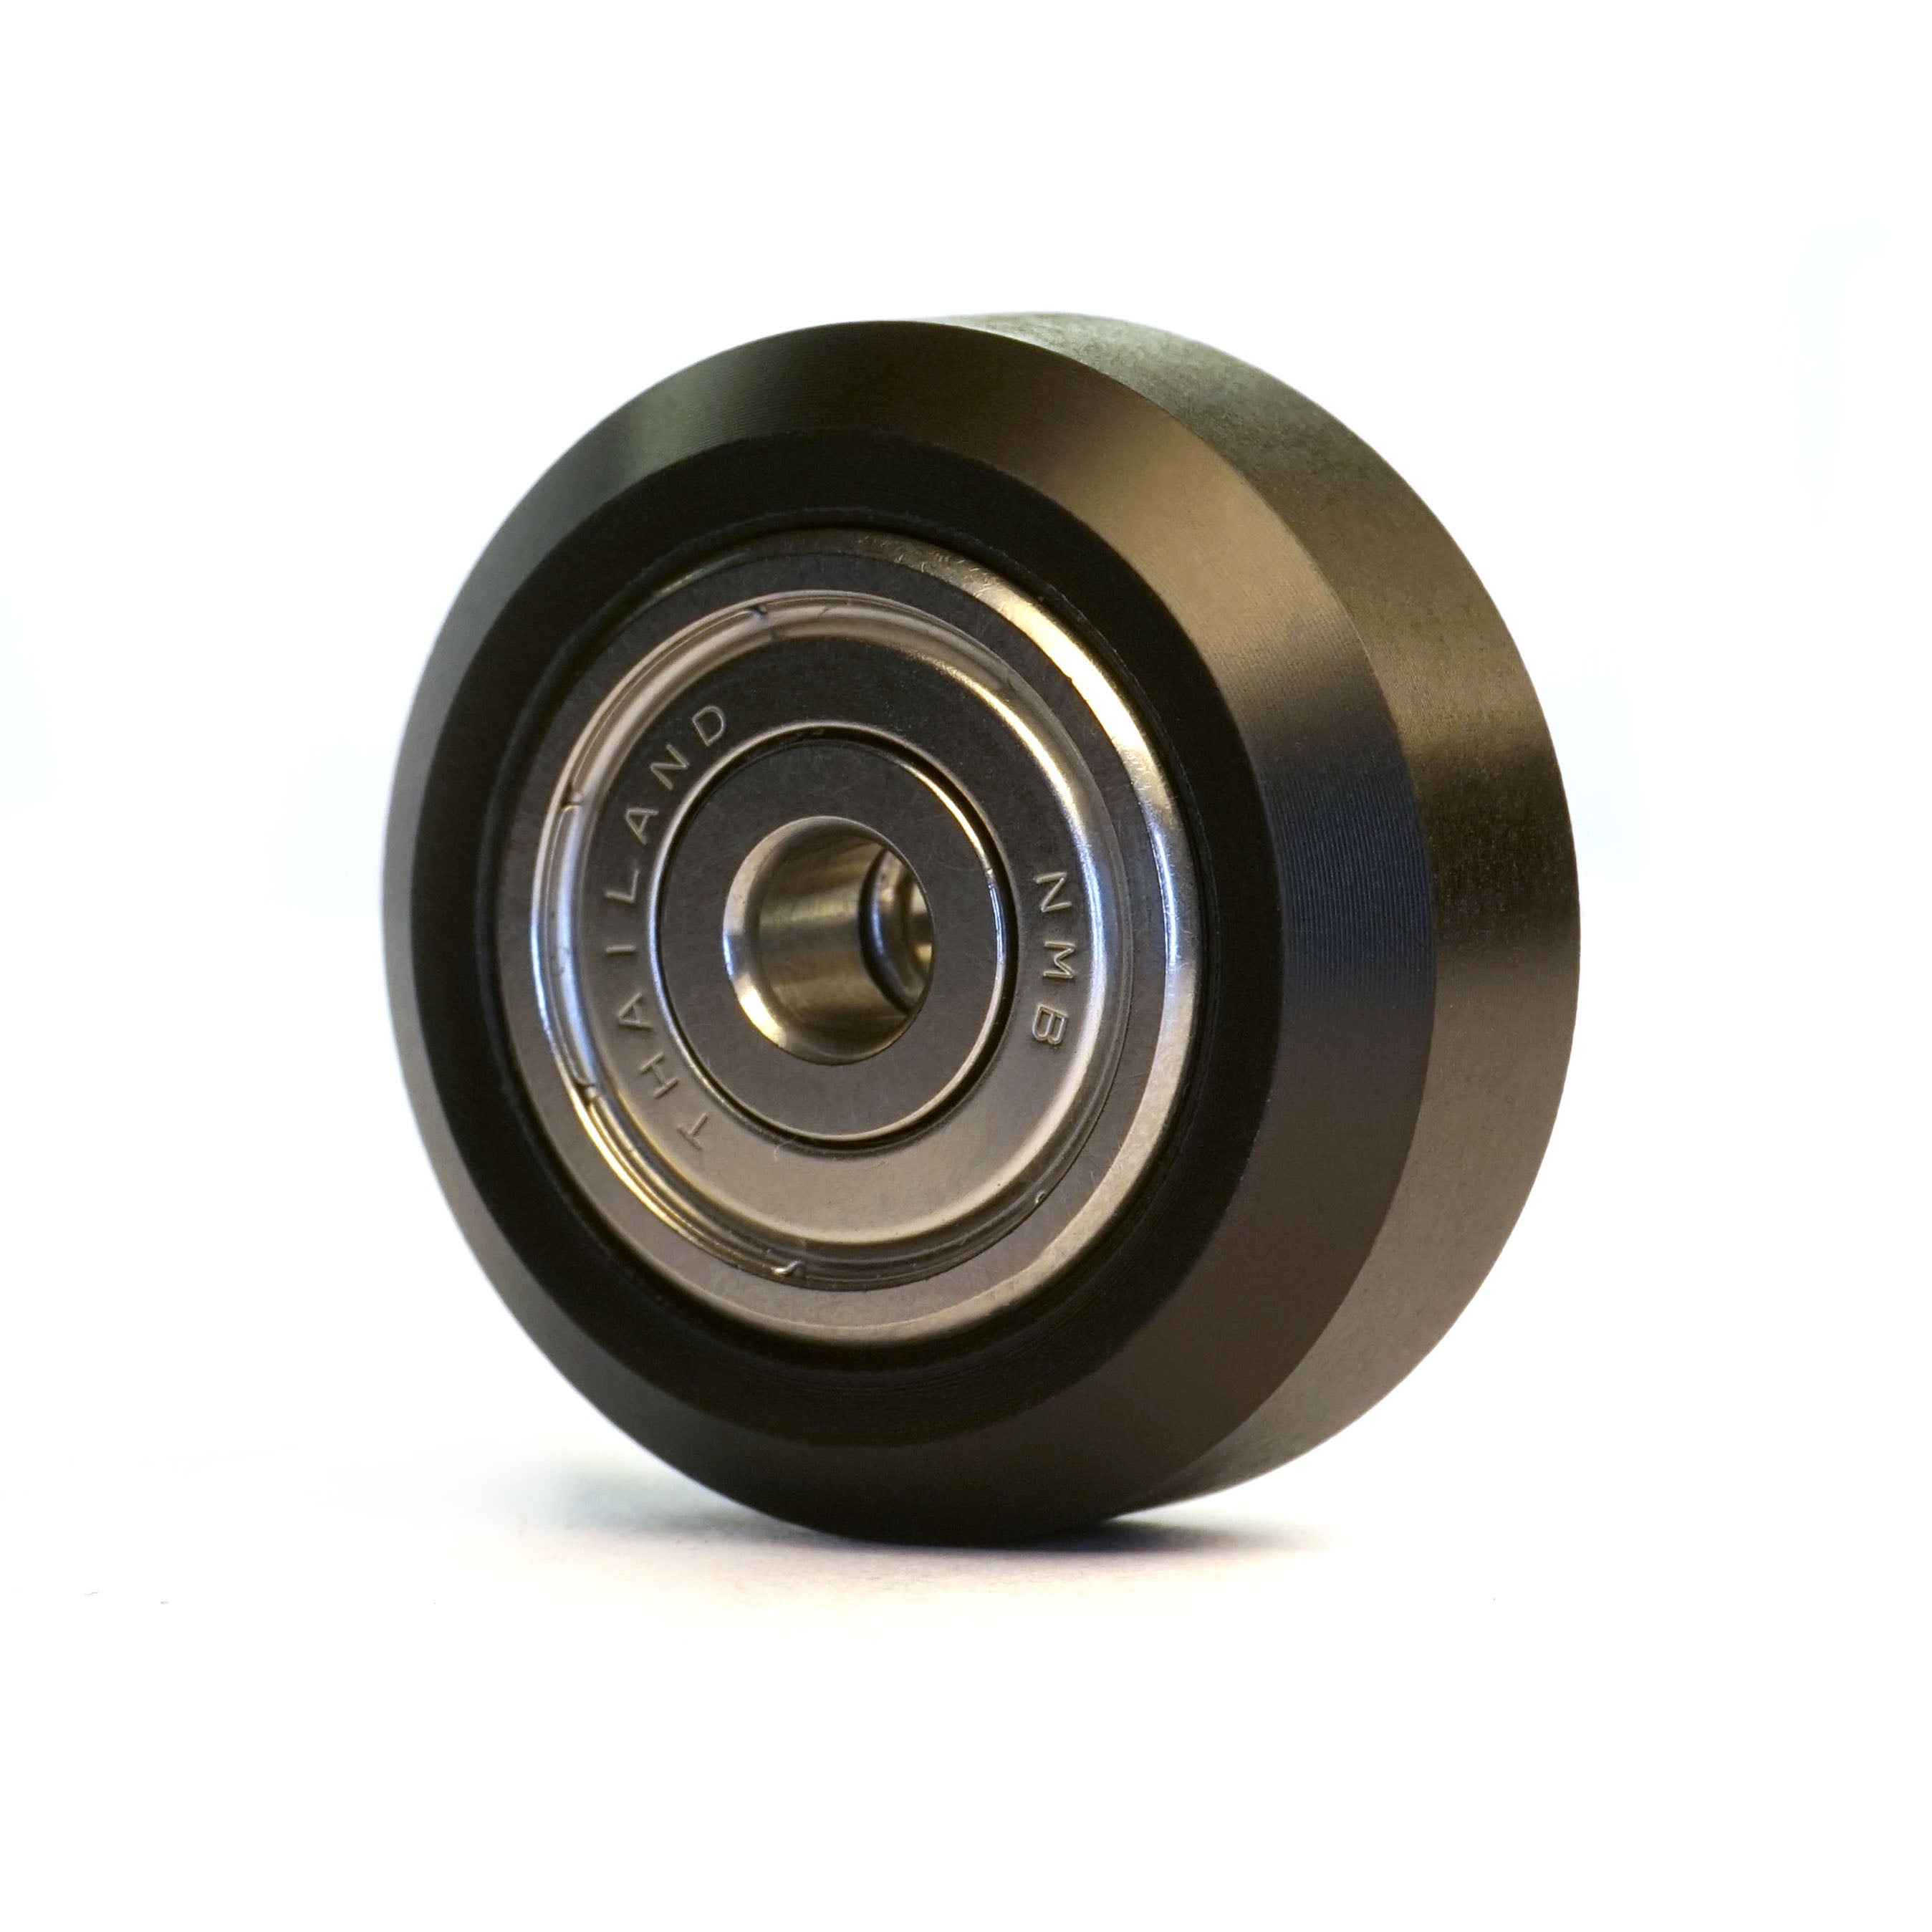 Super Speedy M4 wheel 23.89 mm with stainless steel NMB bearings